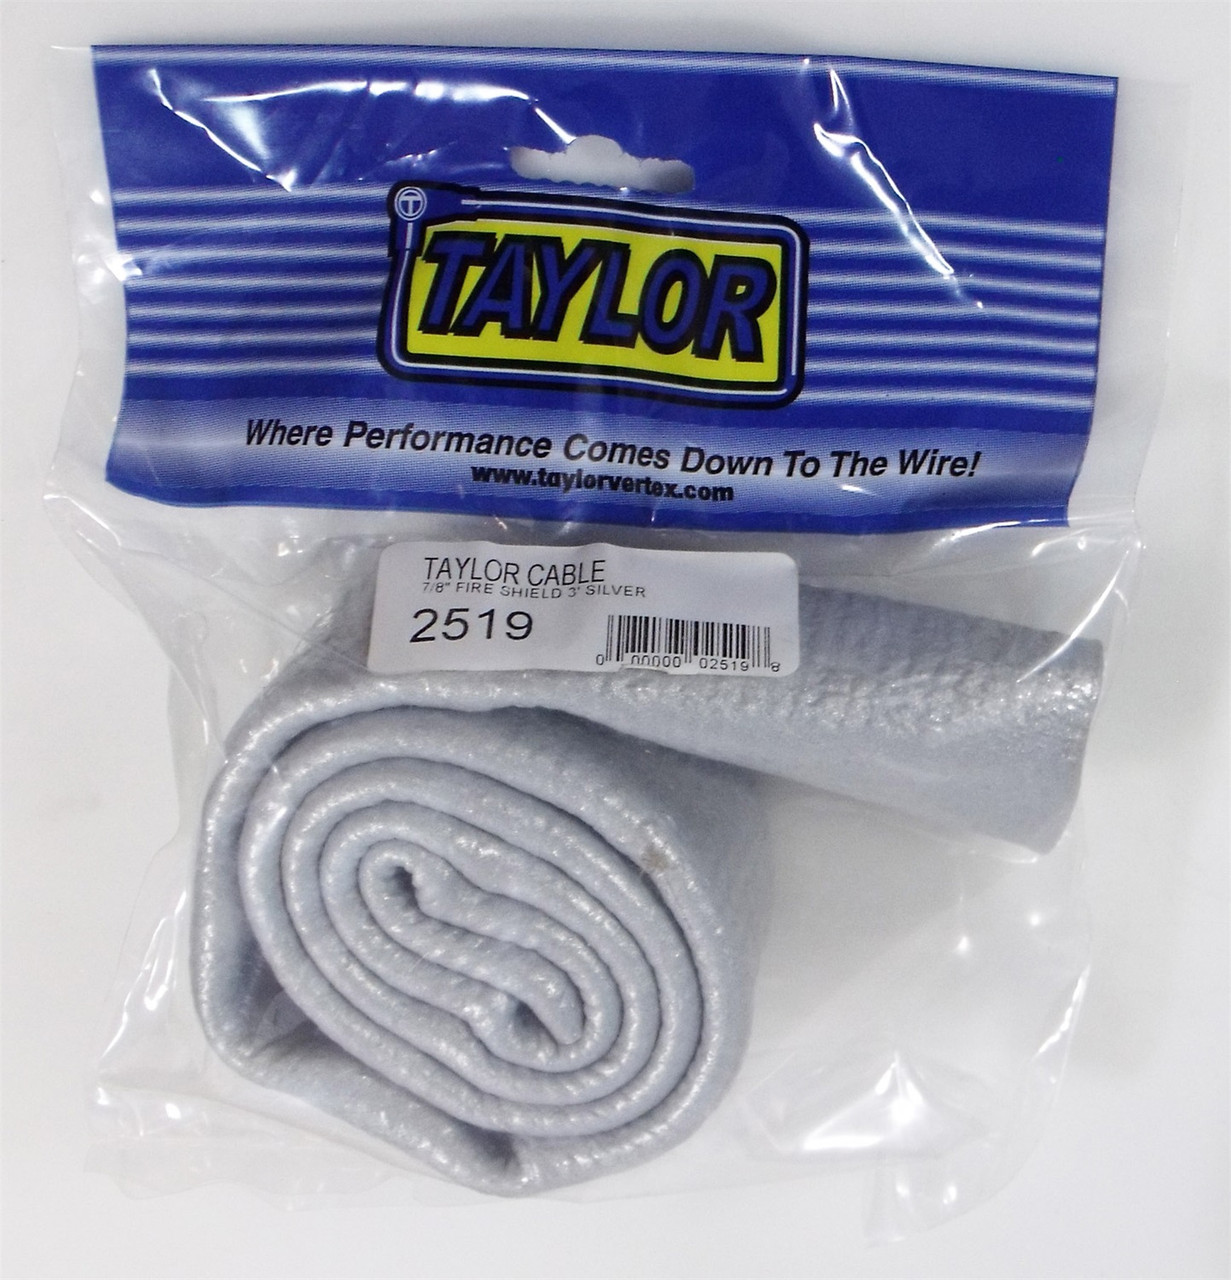 Taylor Cable 2519 Fire Sleeving